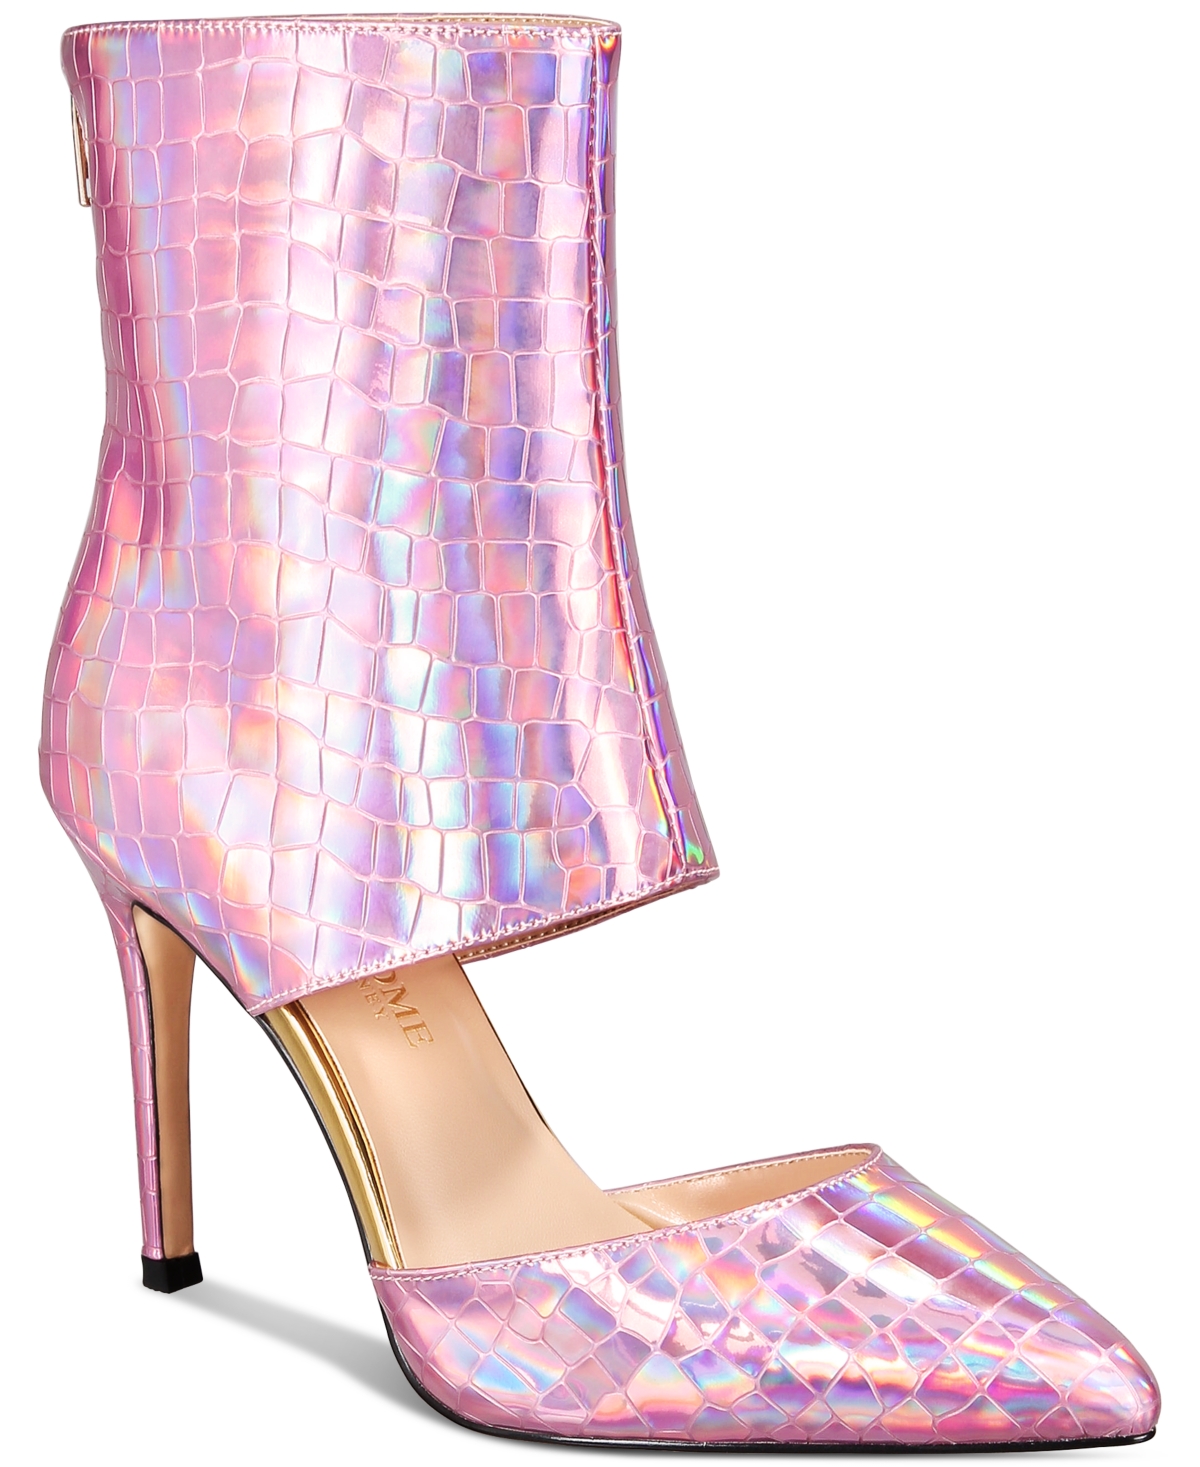 Shop Things Ii Come Women's Jelyn Luxurious Shooties In Iridescent Pink Snake